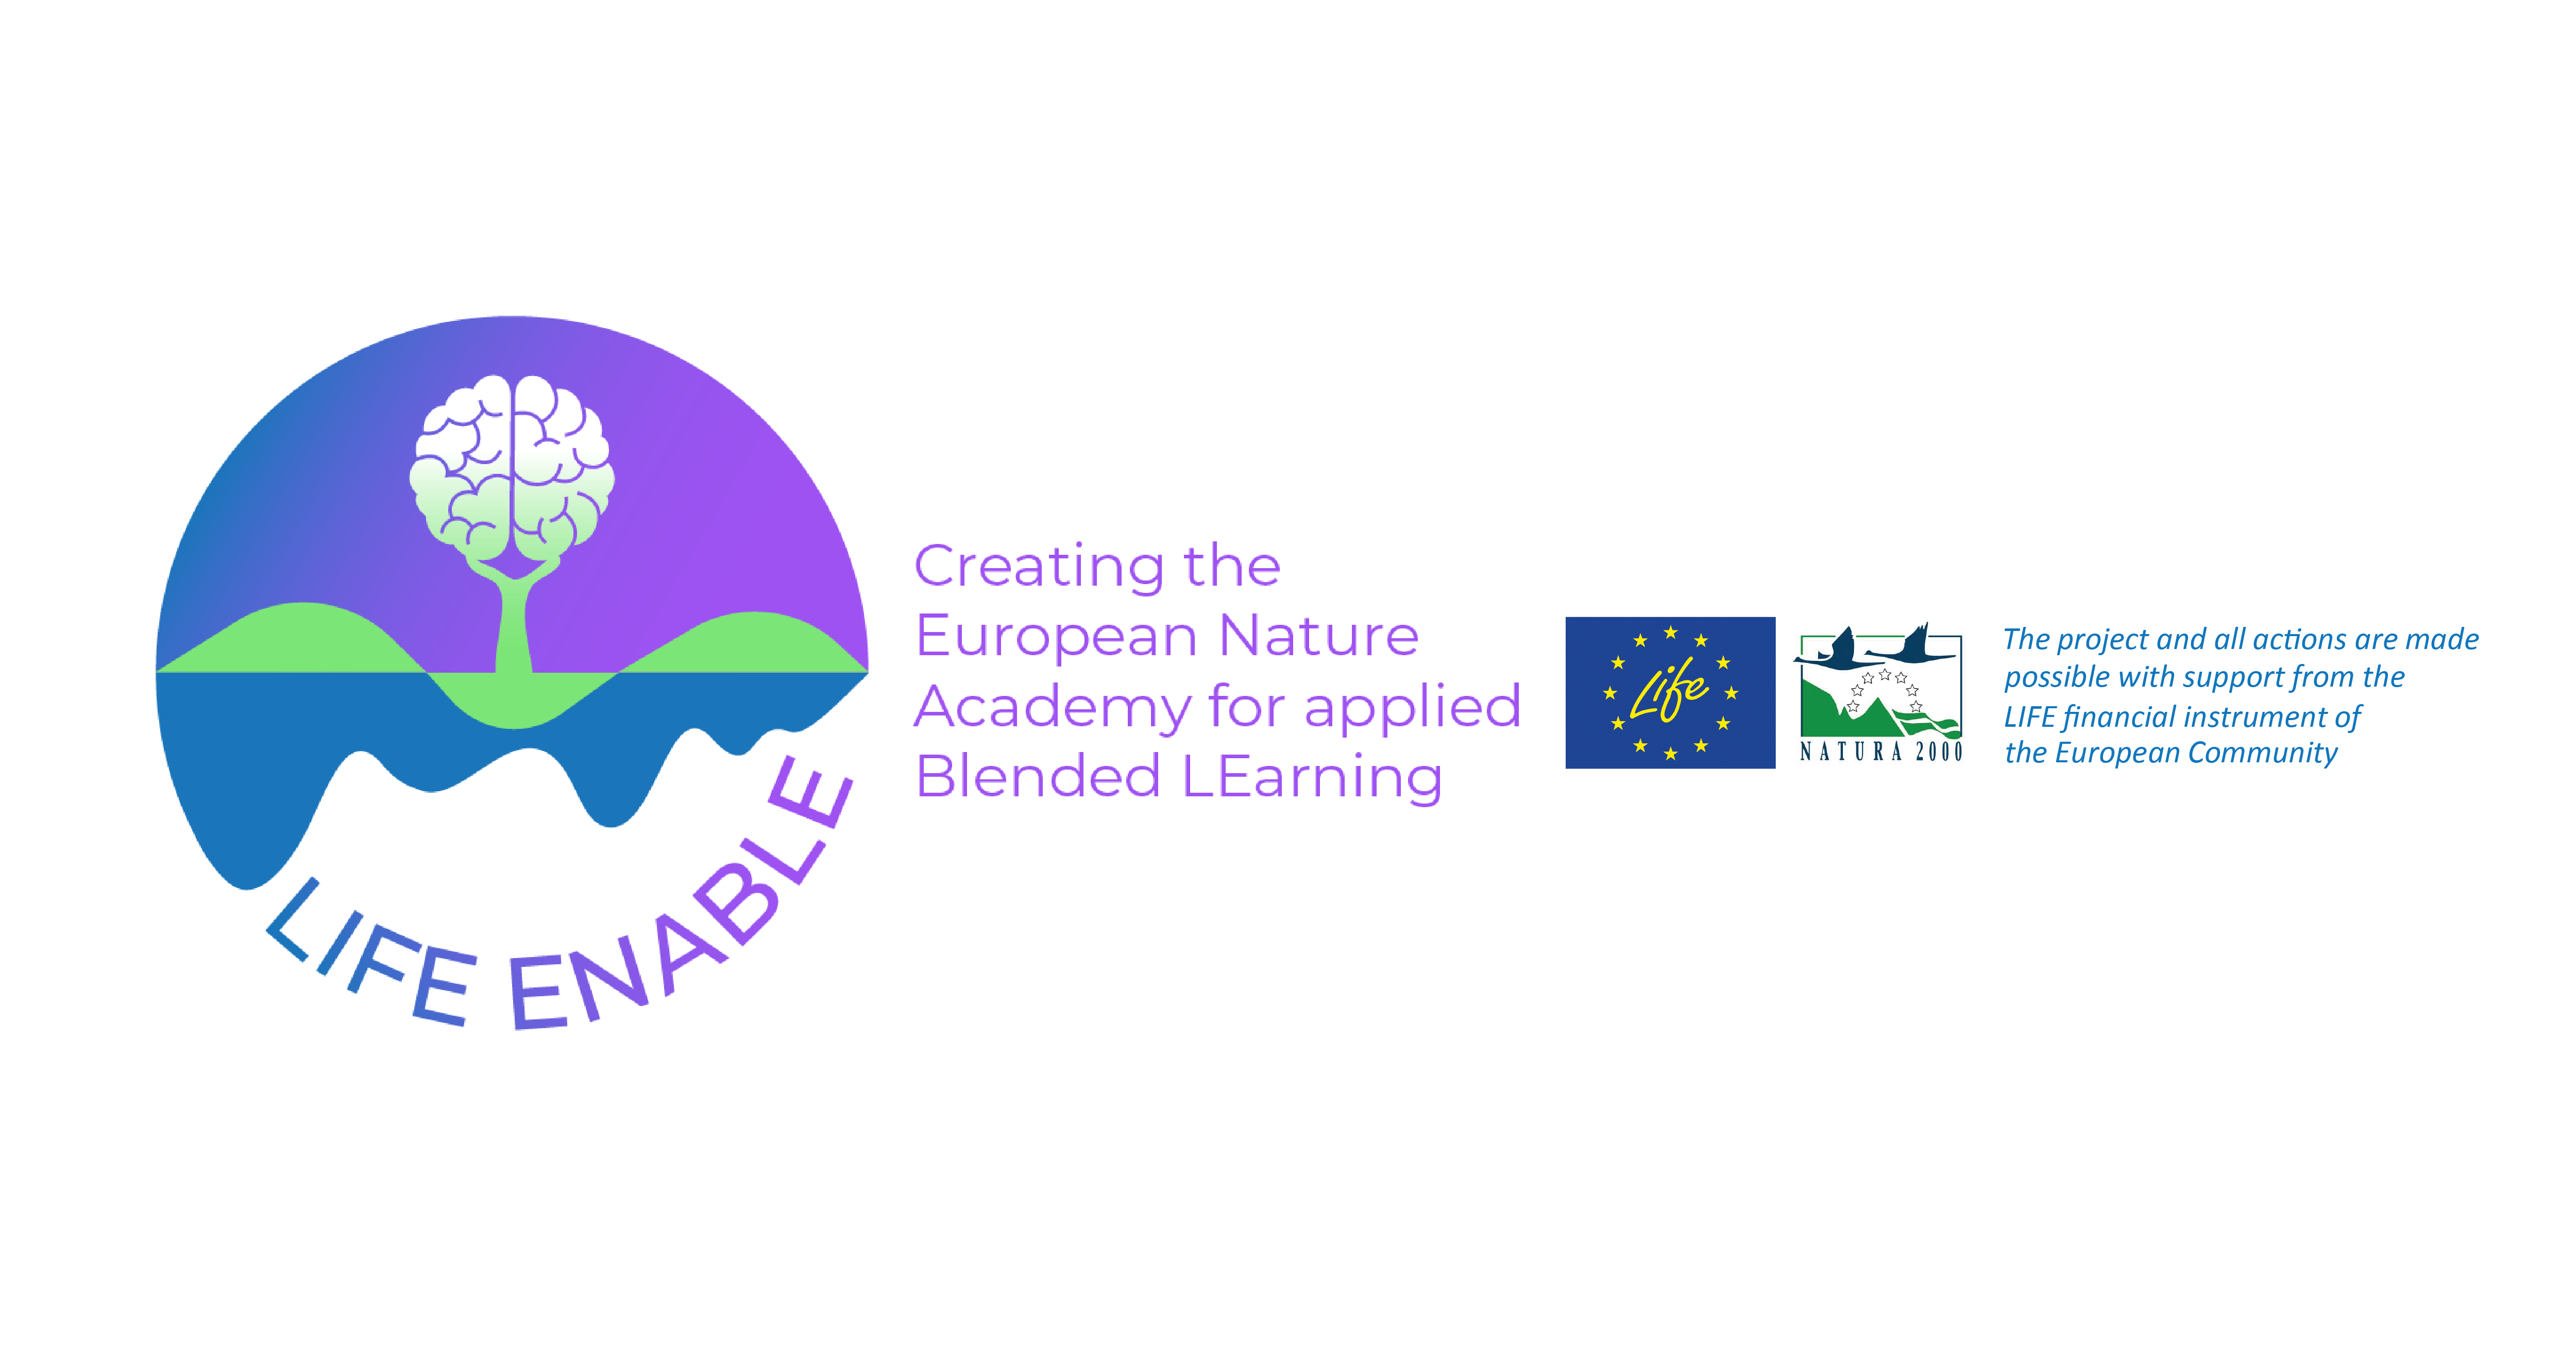 Register now | Developing the European Nature Academy (ENA)